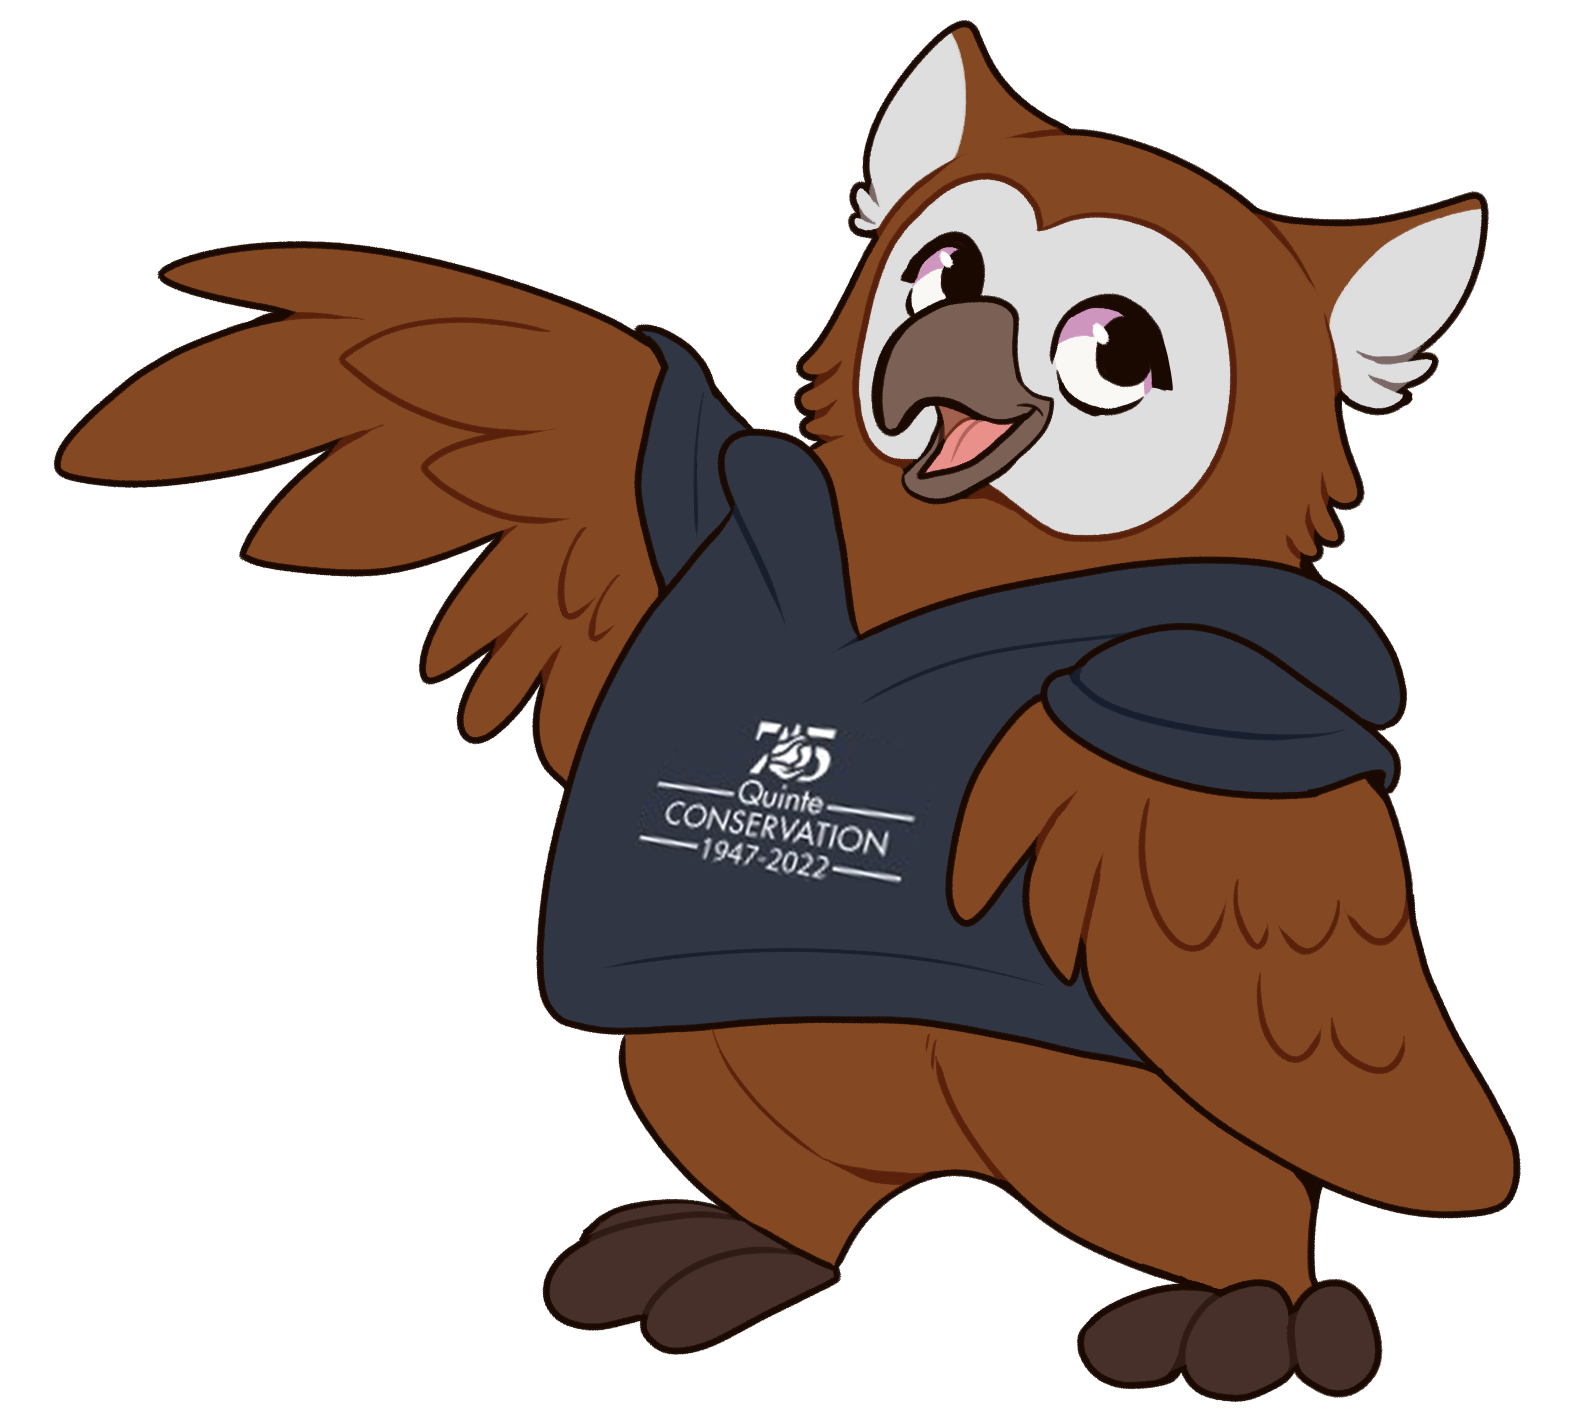 Illustrated Owl wearing blue t-shirt with one wing waving